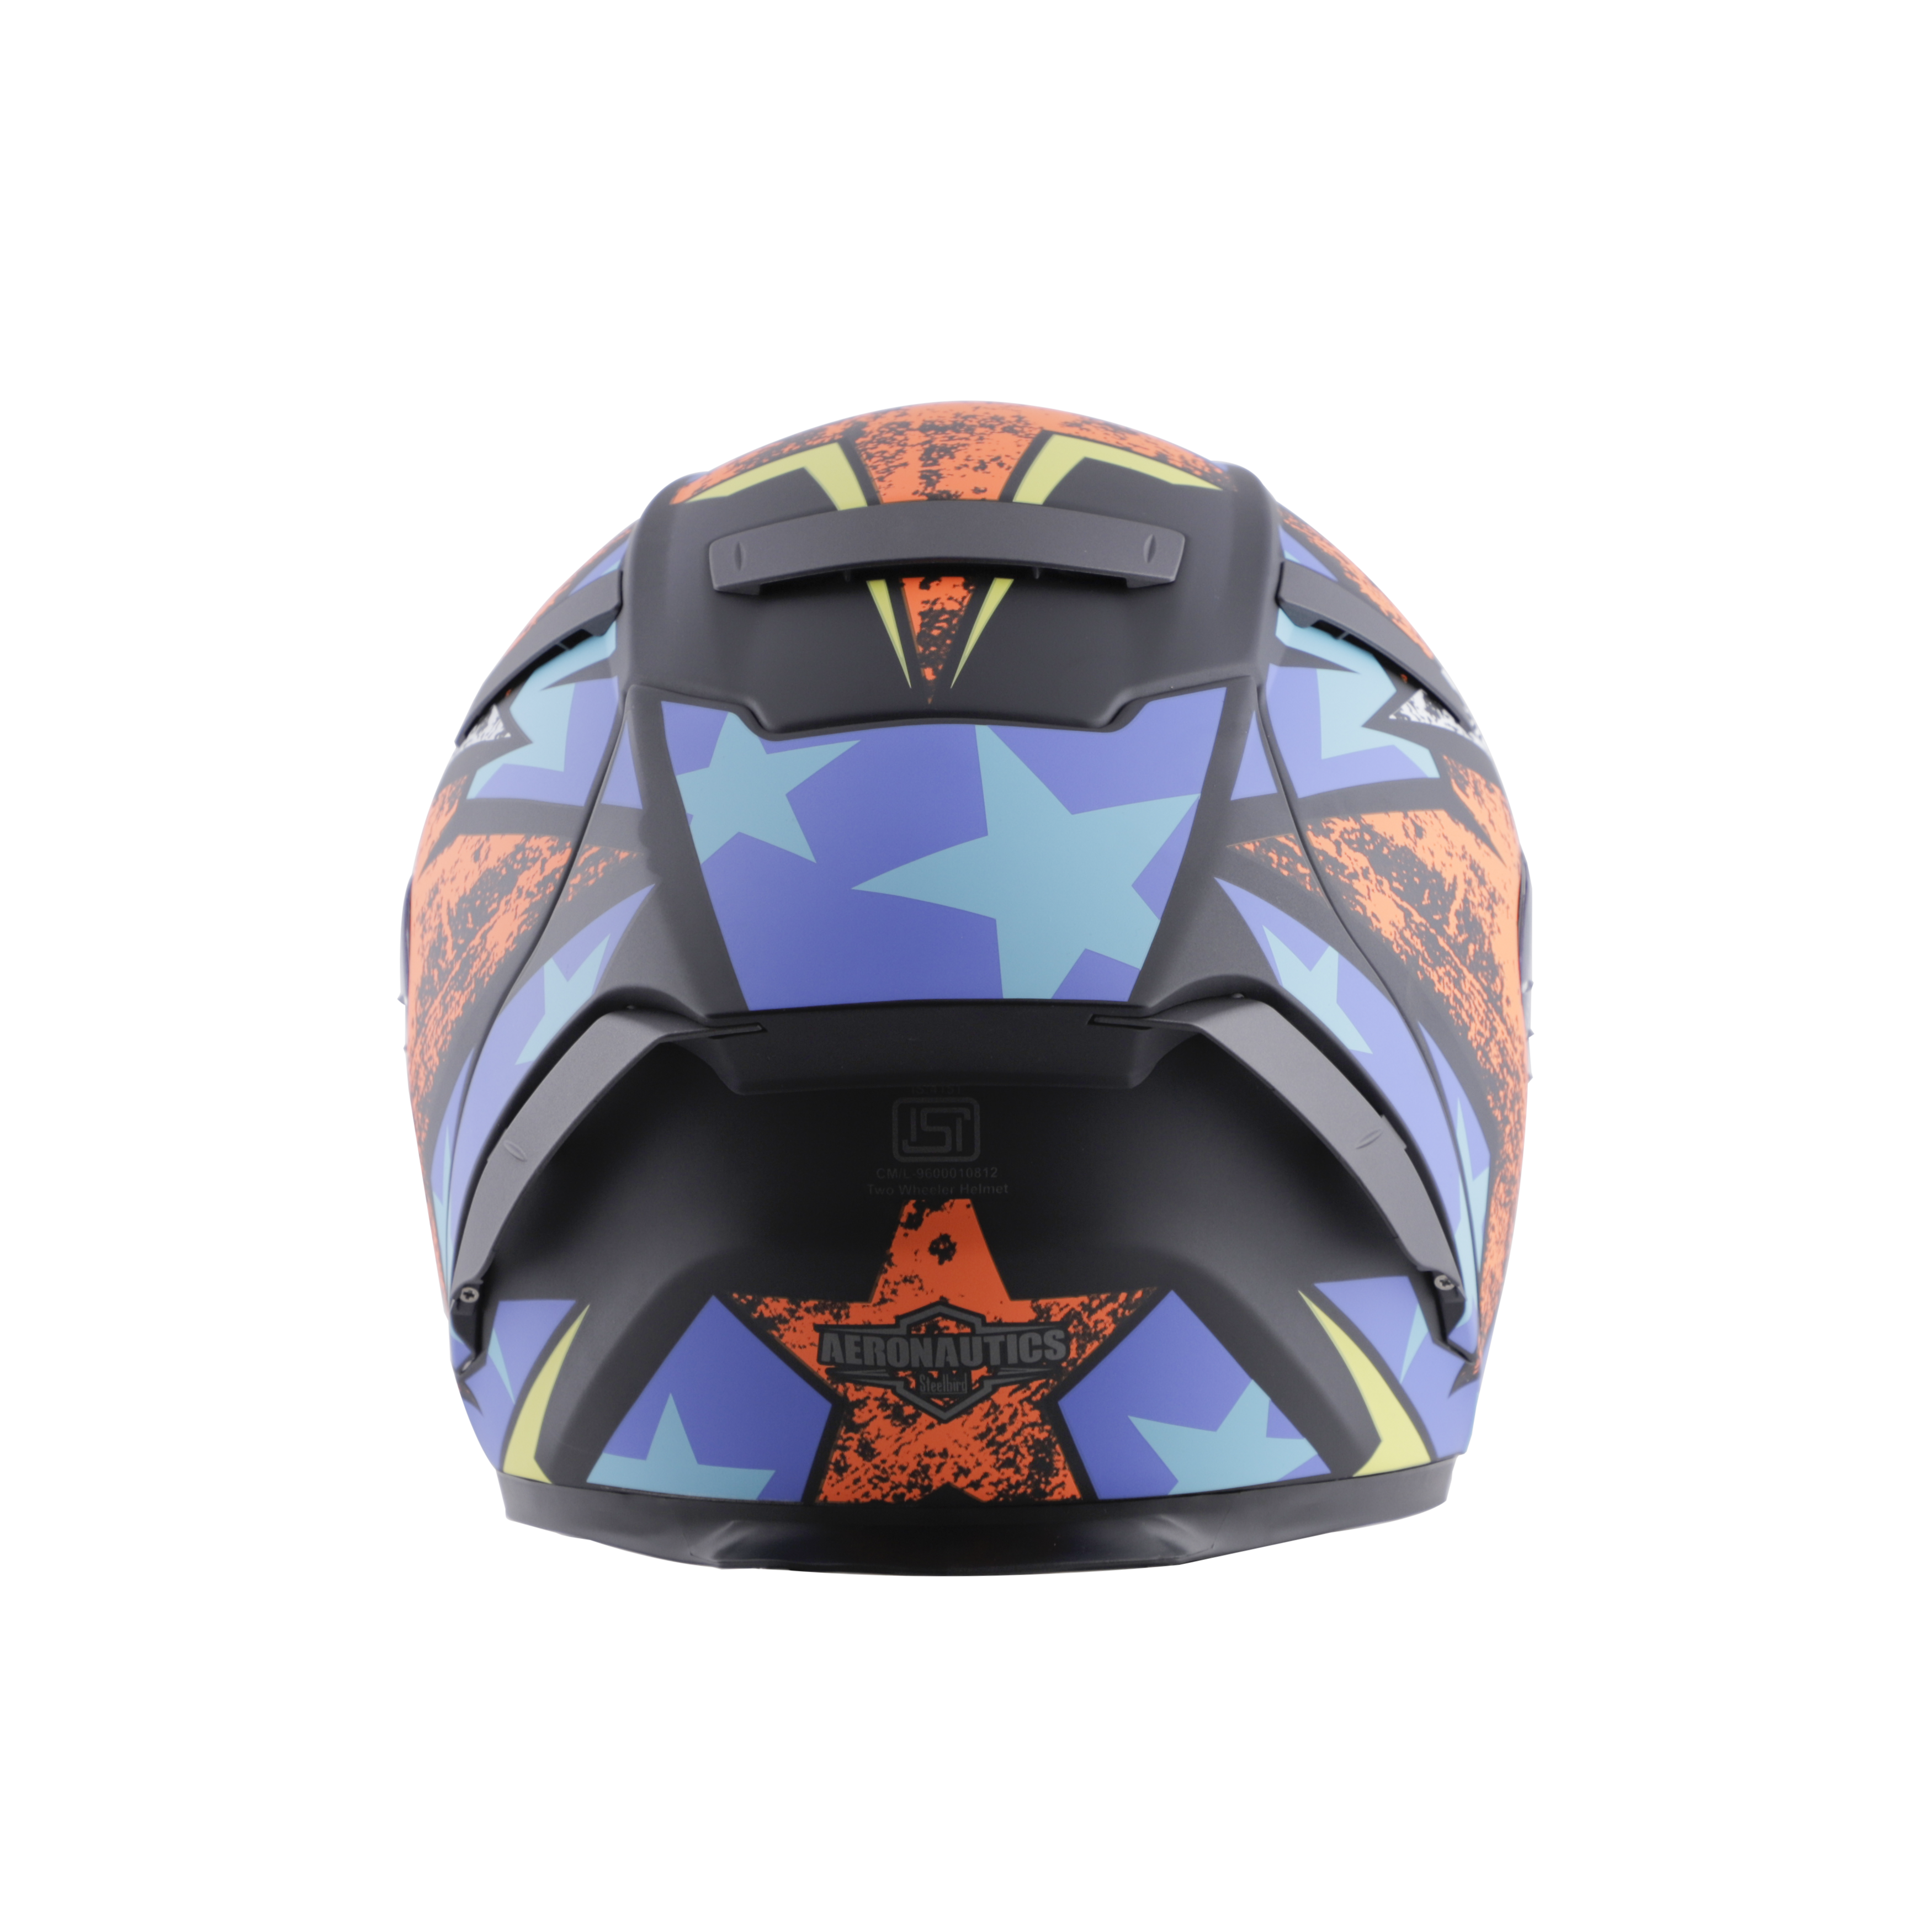 SA-2 STAR GLOSSY BLACK WITH ORANGE FITTED WITH CLEAR VISOR EXTRA CHROME RAINBOW VISOR FREE (WITH ANTI-FOG SHIELD HOLDER)